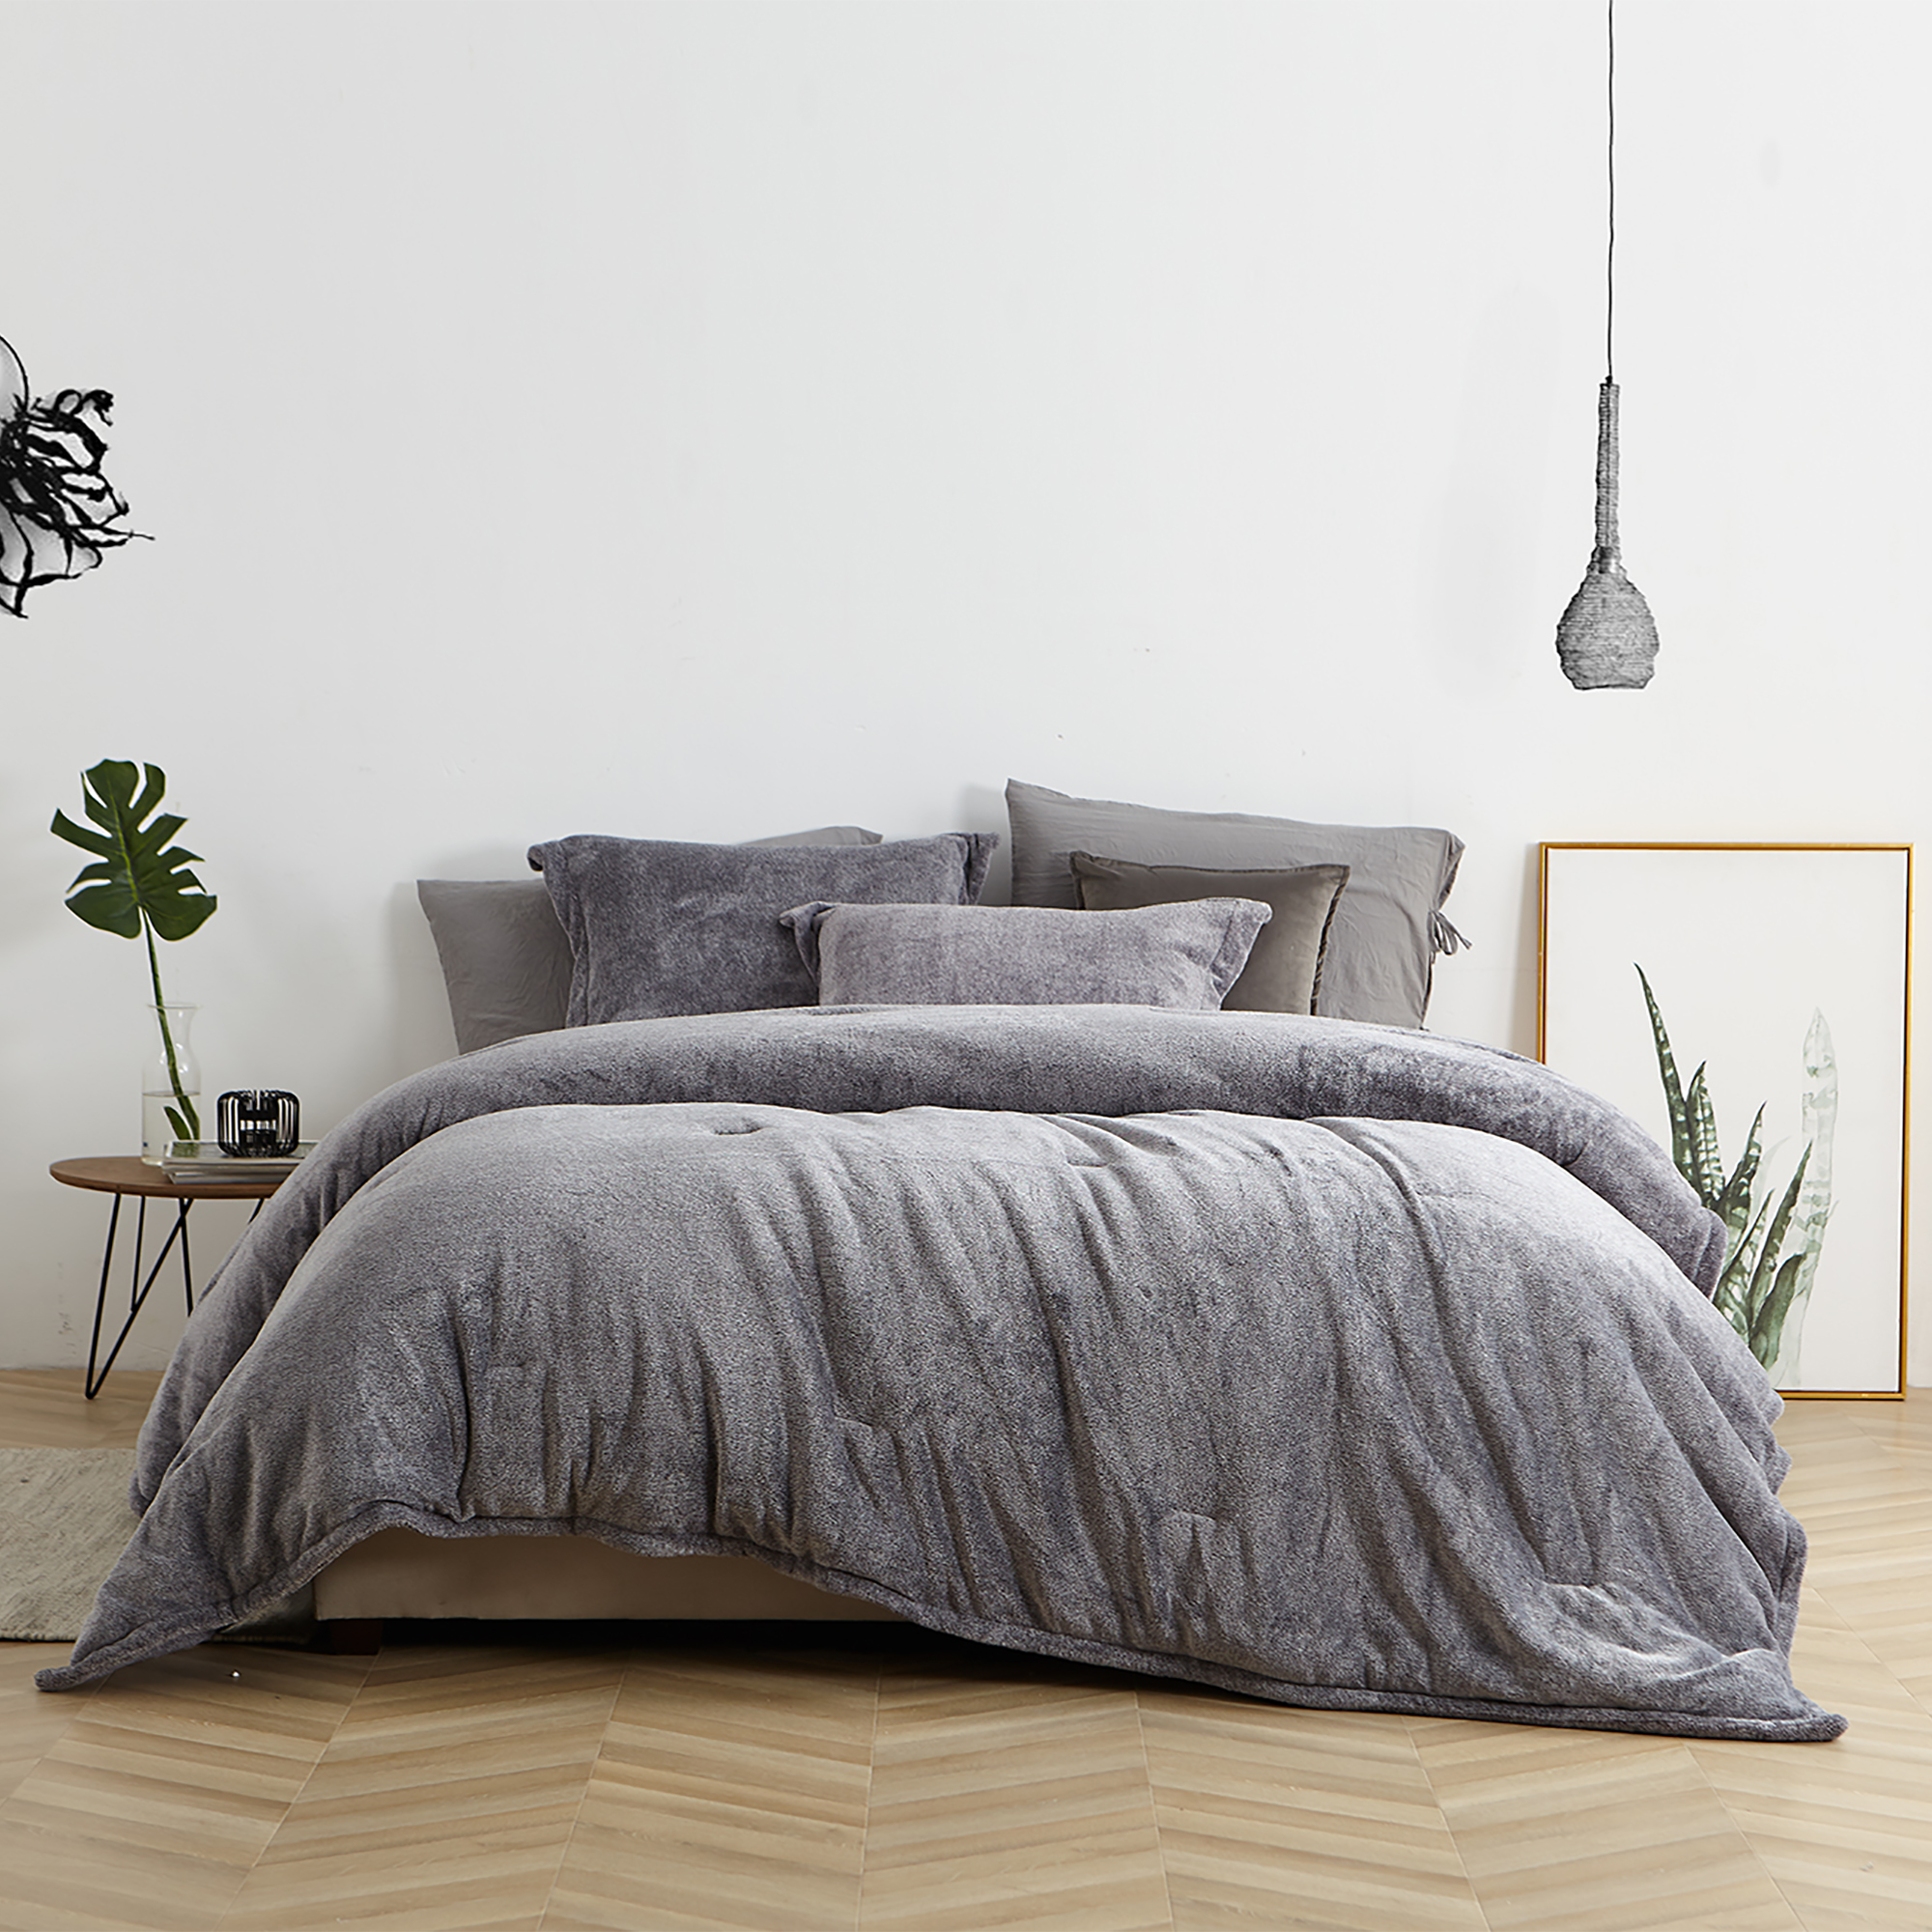 Coma Inducer® Oversized Queen Comforter - UB-Jealy® - Slate Black